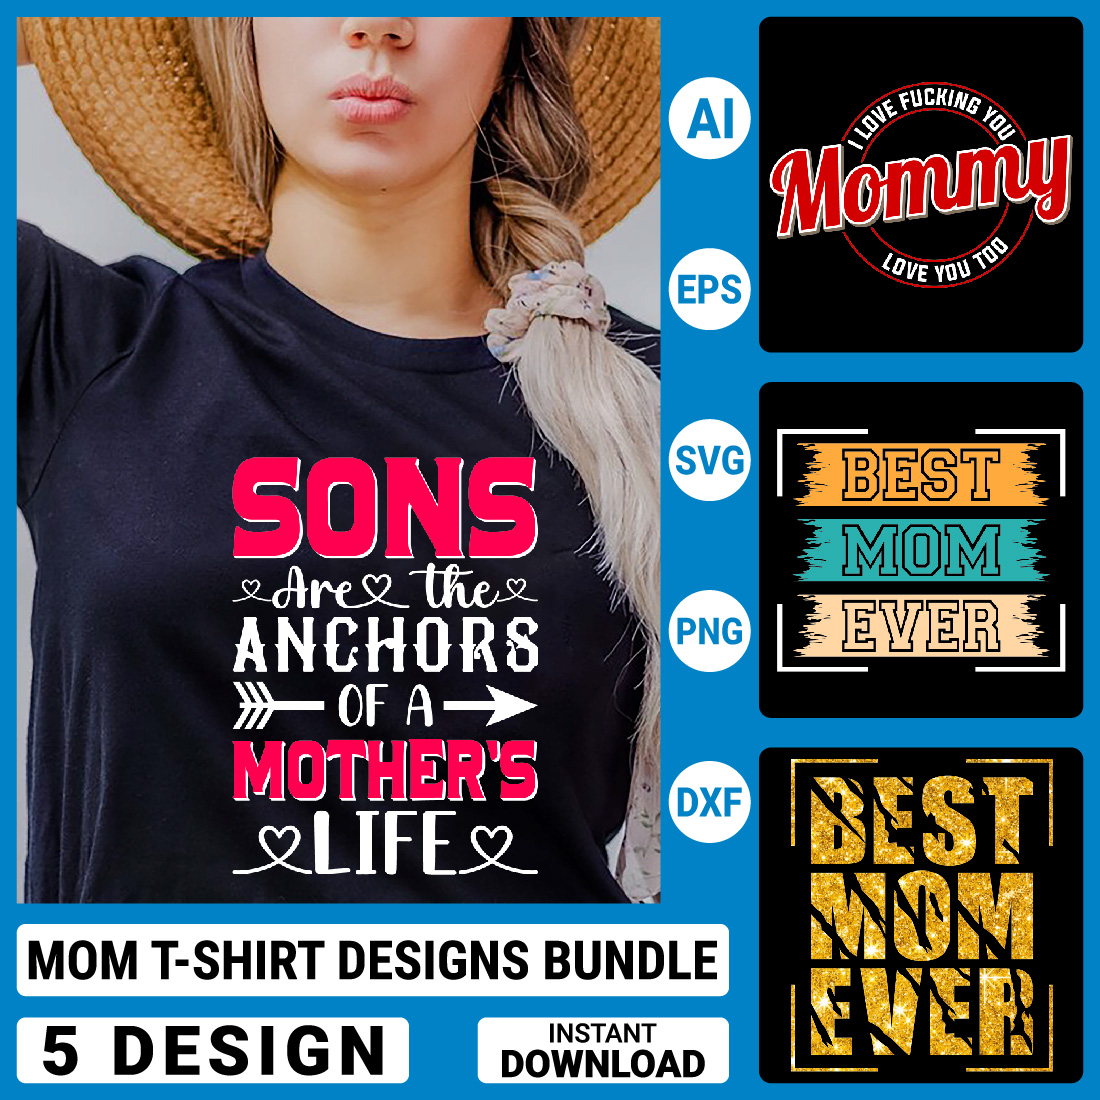 5 Mom T-shirt Designs Bundle, Mother's Day Quotes typography Graphic T-shirt Collection cover image.